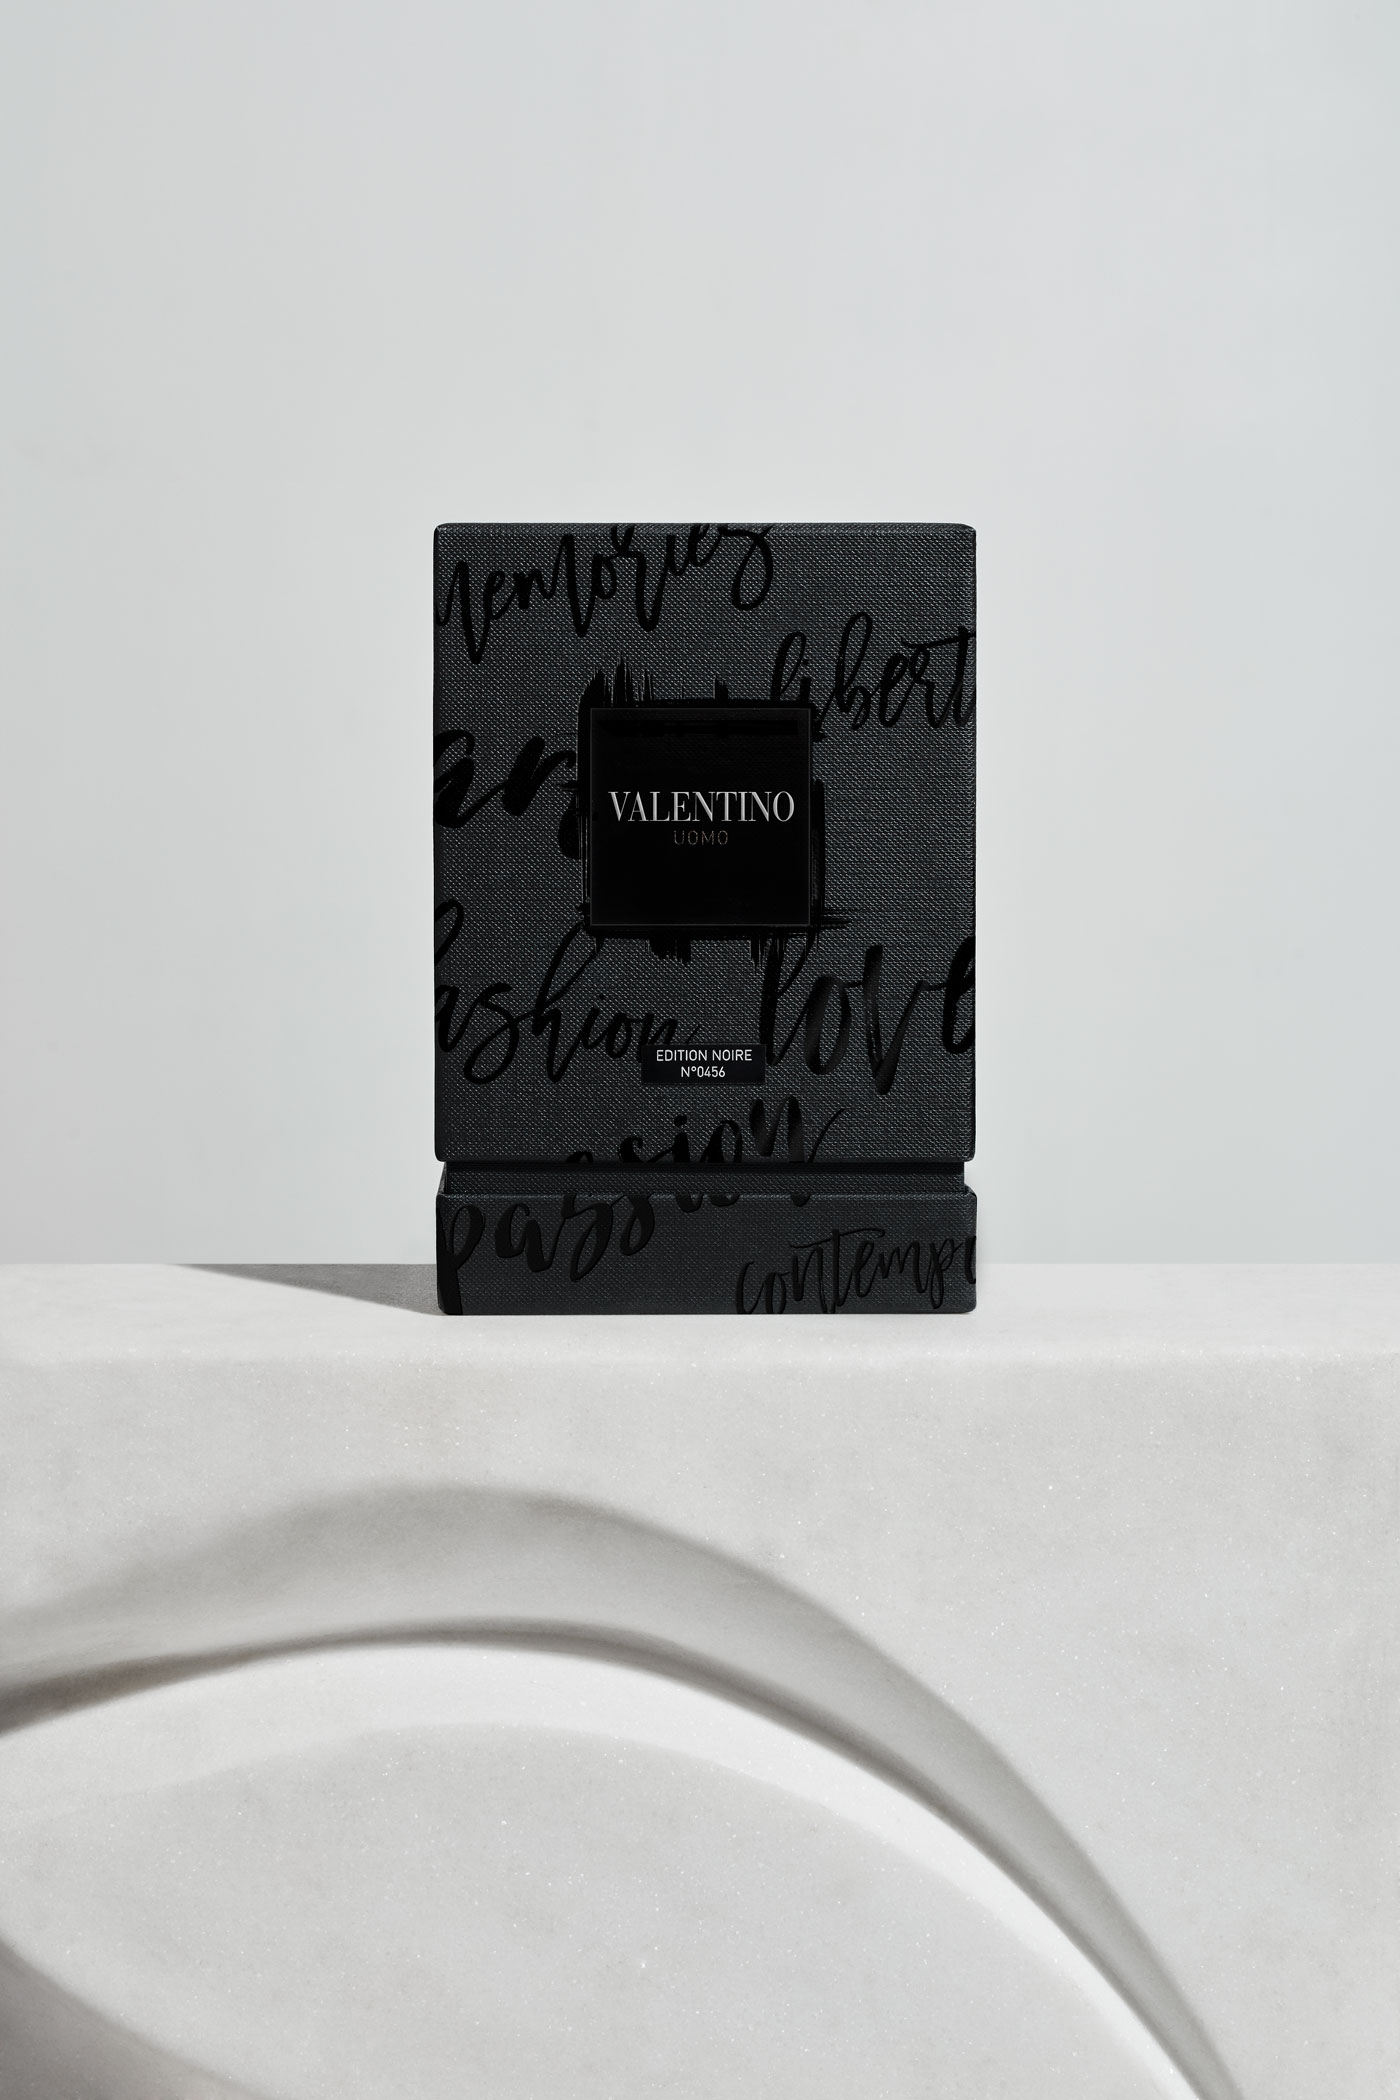 Valentino Parfums – Packaging limited edition (prototype)